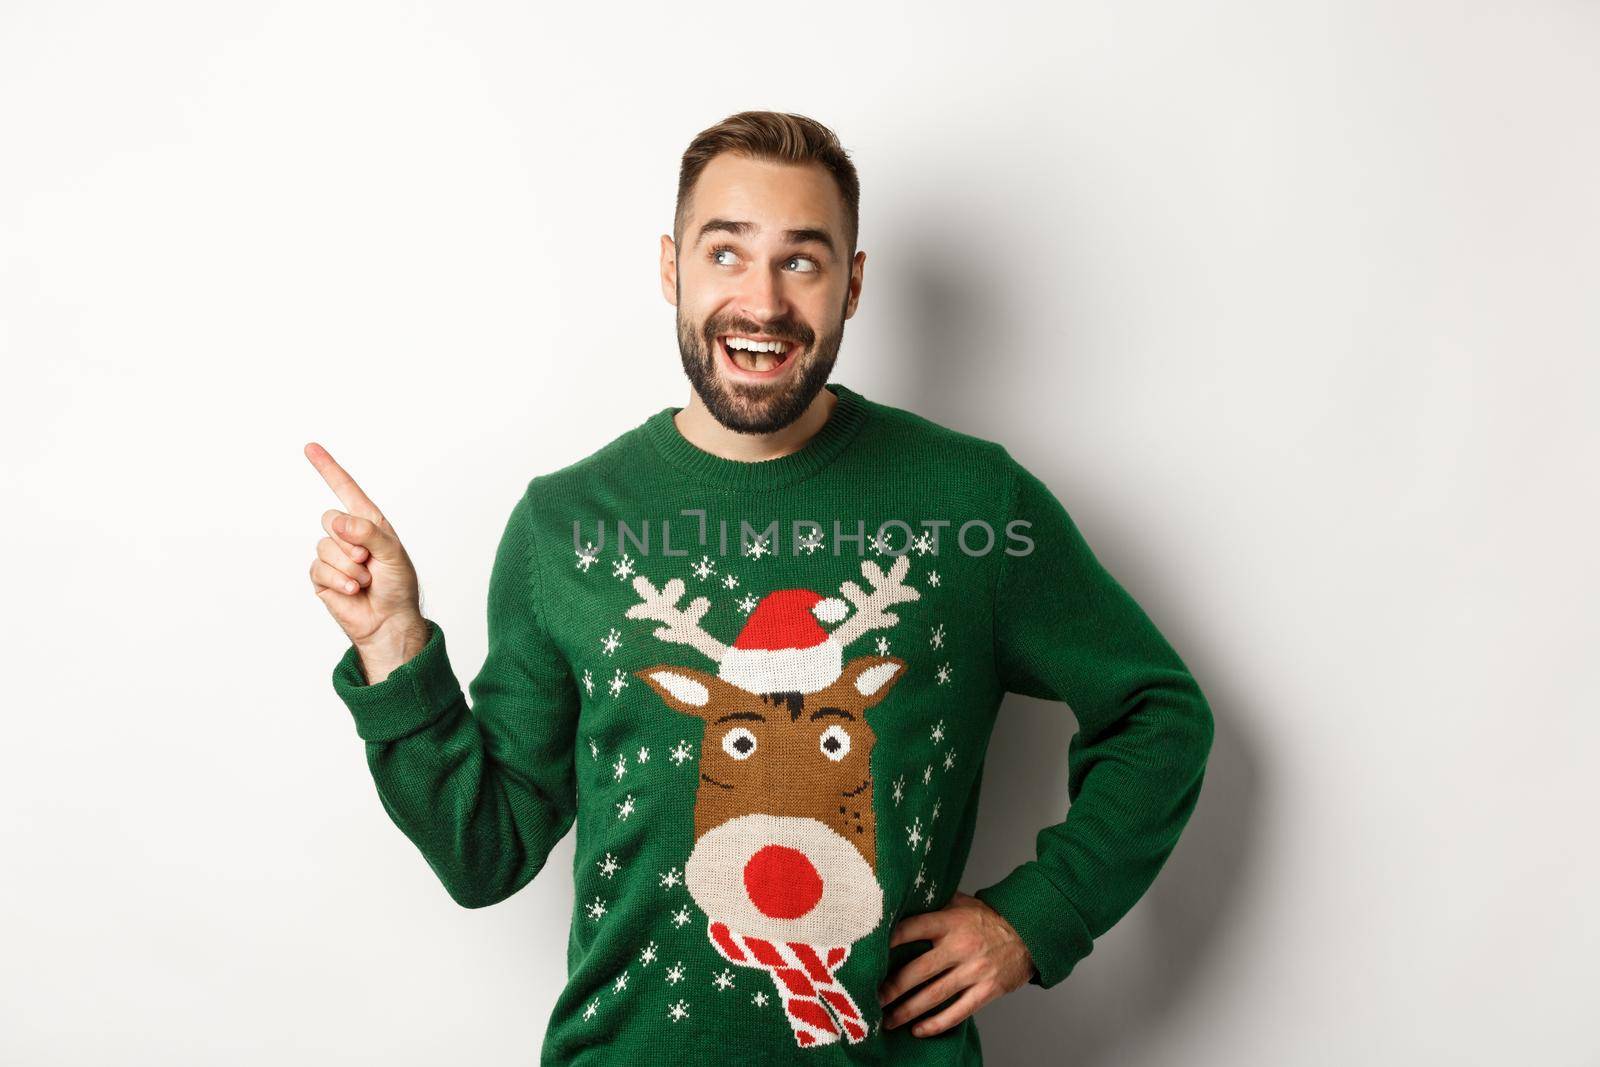 New year celebration and winter holidays concept. Dreamy bearded man in green christmas sweater, pointing at upper left corner and smiling amused, white background.